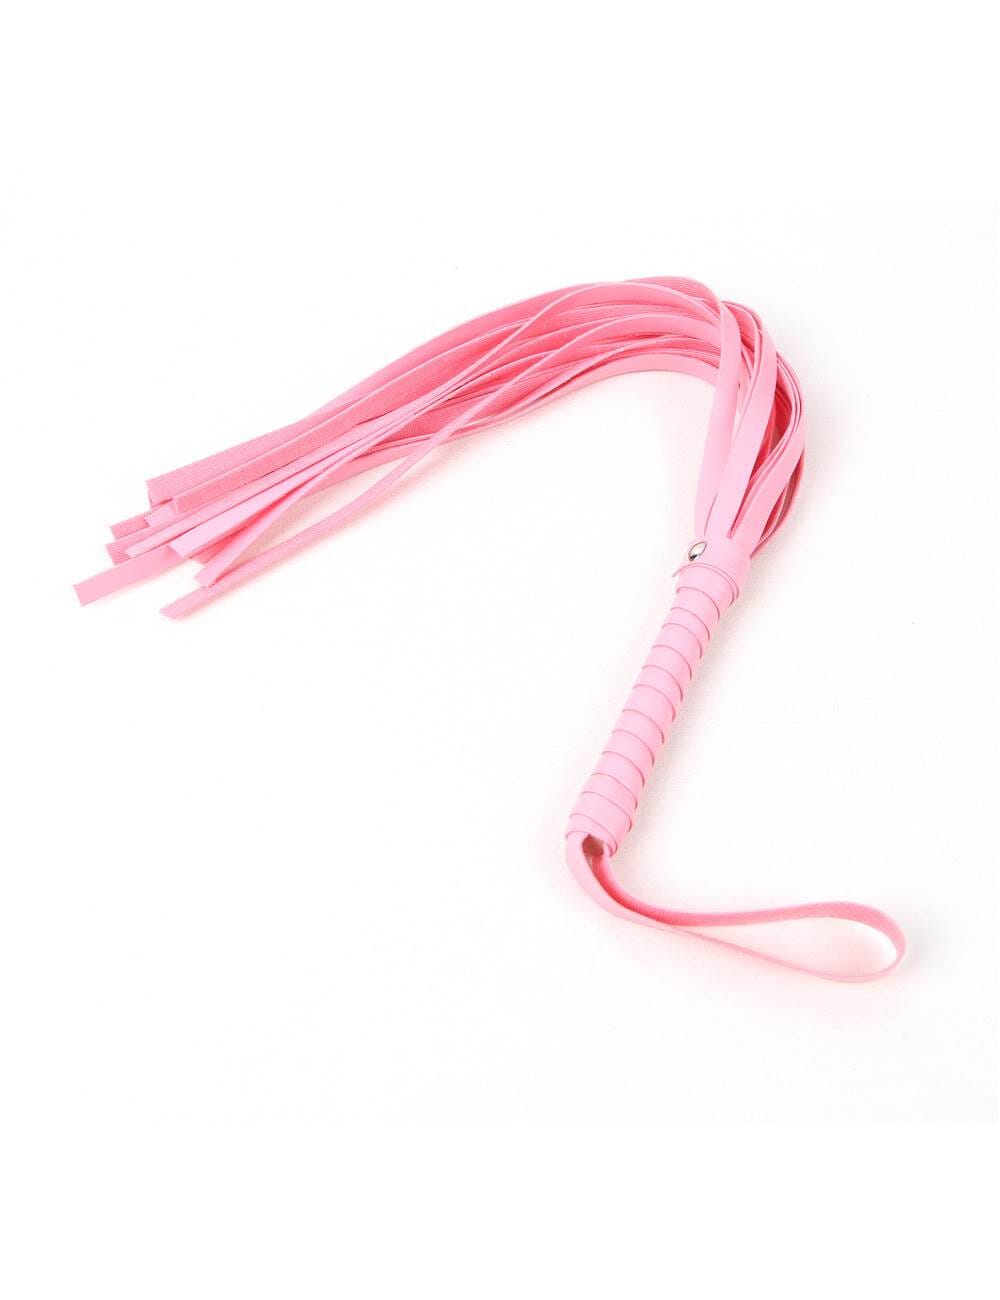 a pink flogger with a long handle on a white background